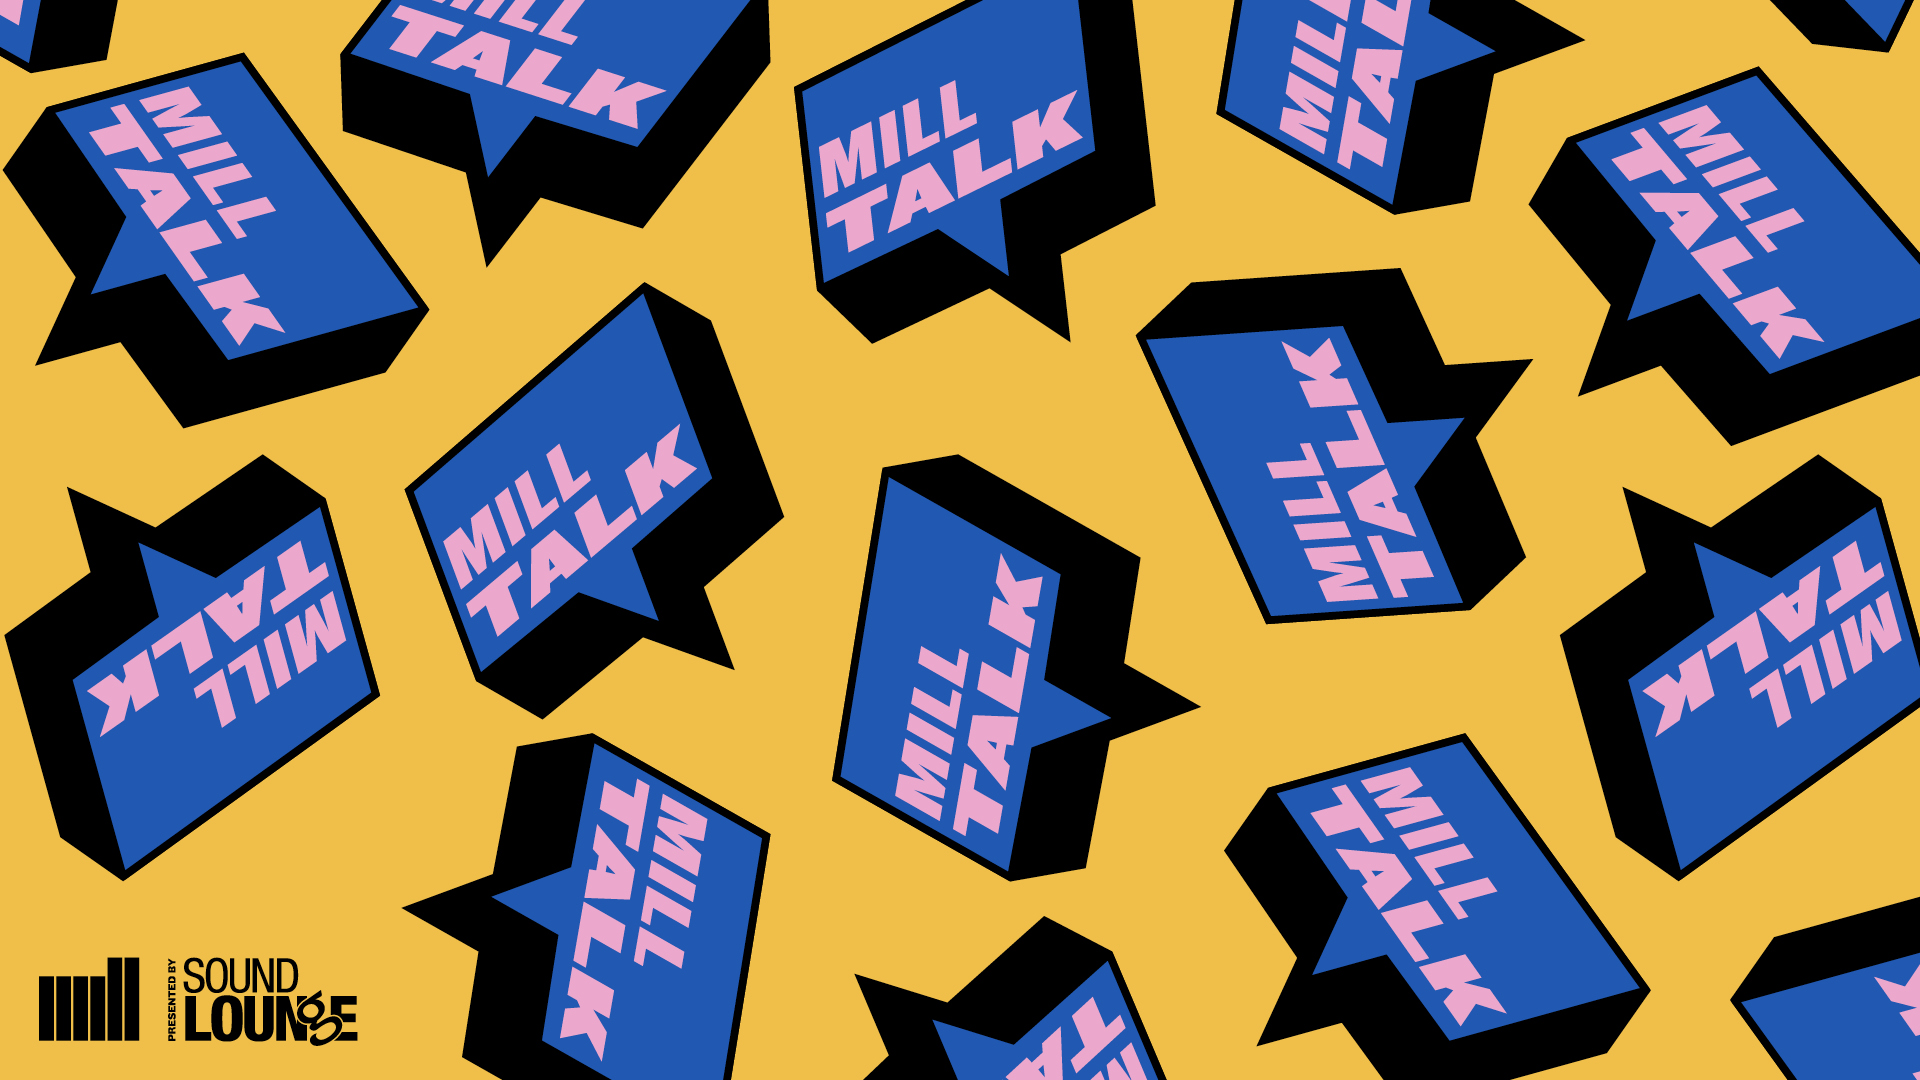 A collage of Mill Talk speech bublles in blue and pink on mustard yellow